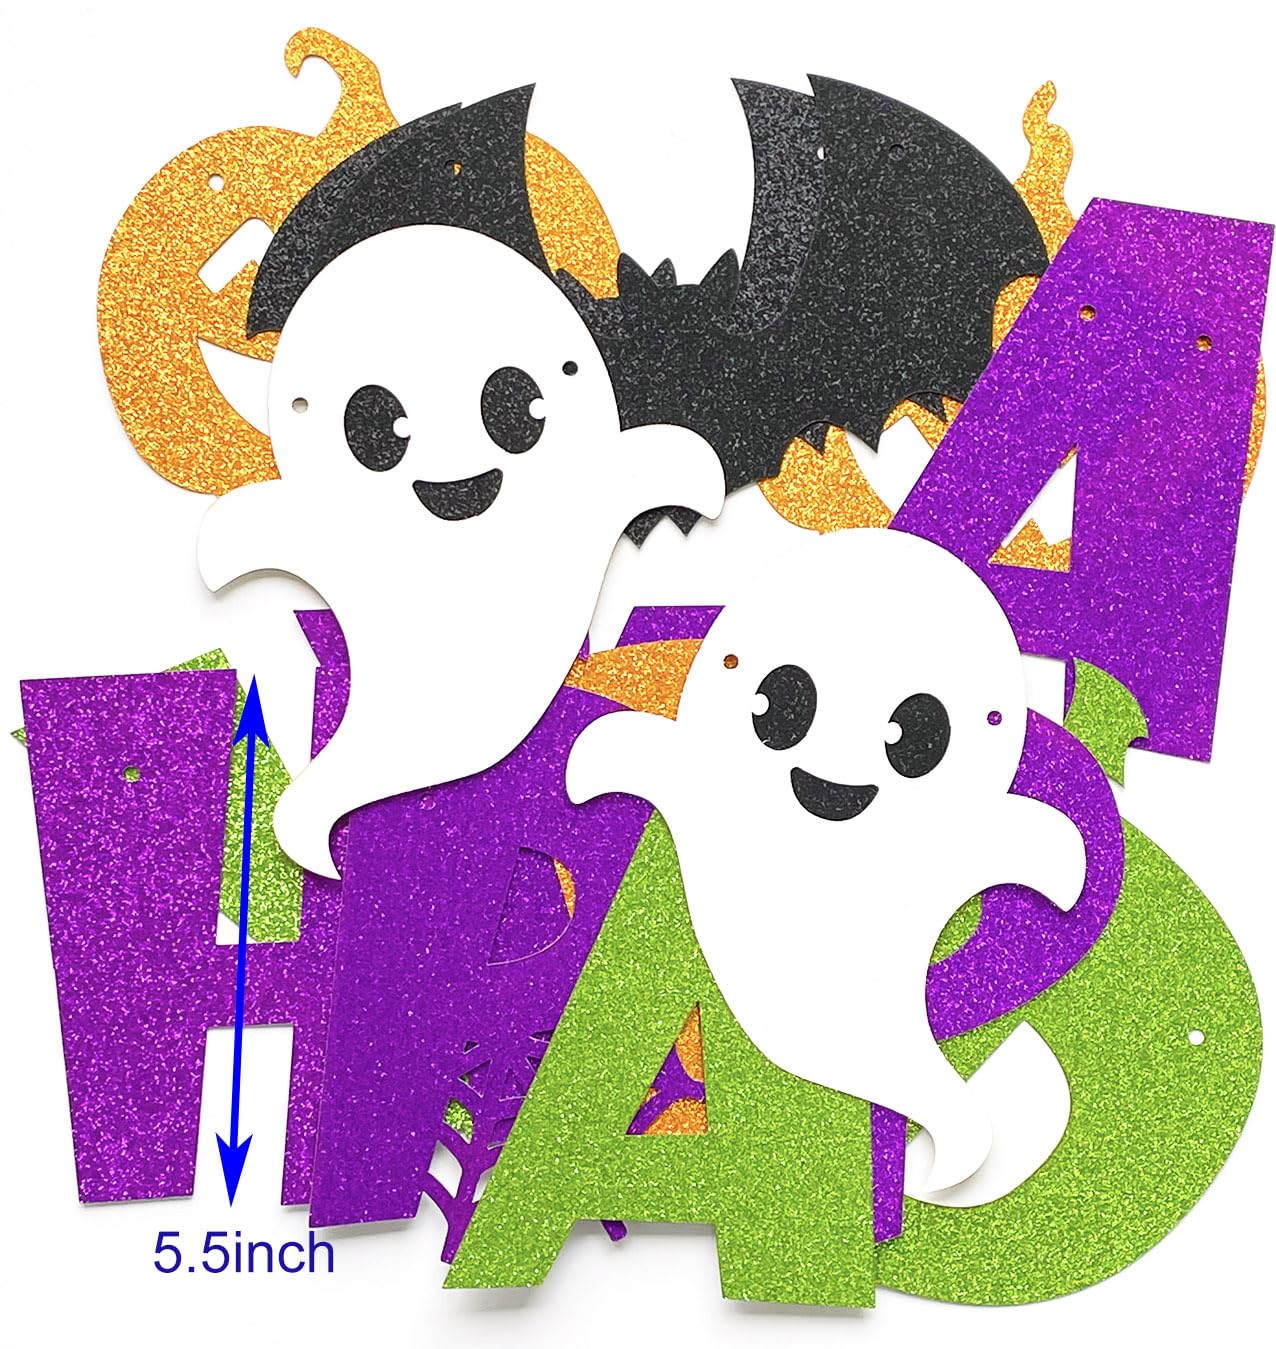 Happy Boo Day Banner Halloween Ghost Pumpkin Bat Theme decoration, colorful Happy booday Sign for Kids Boy Girl Birthday Halloween Festival Holiday Party Decorations